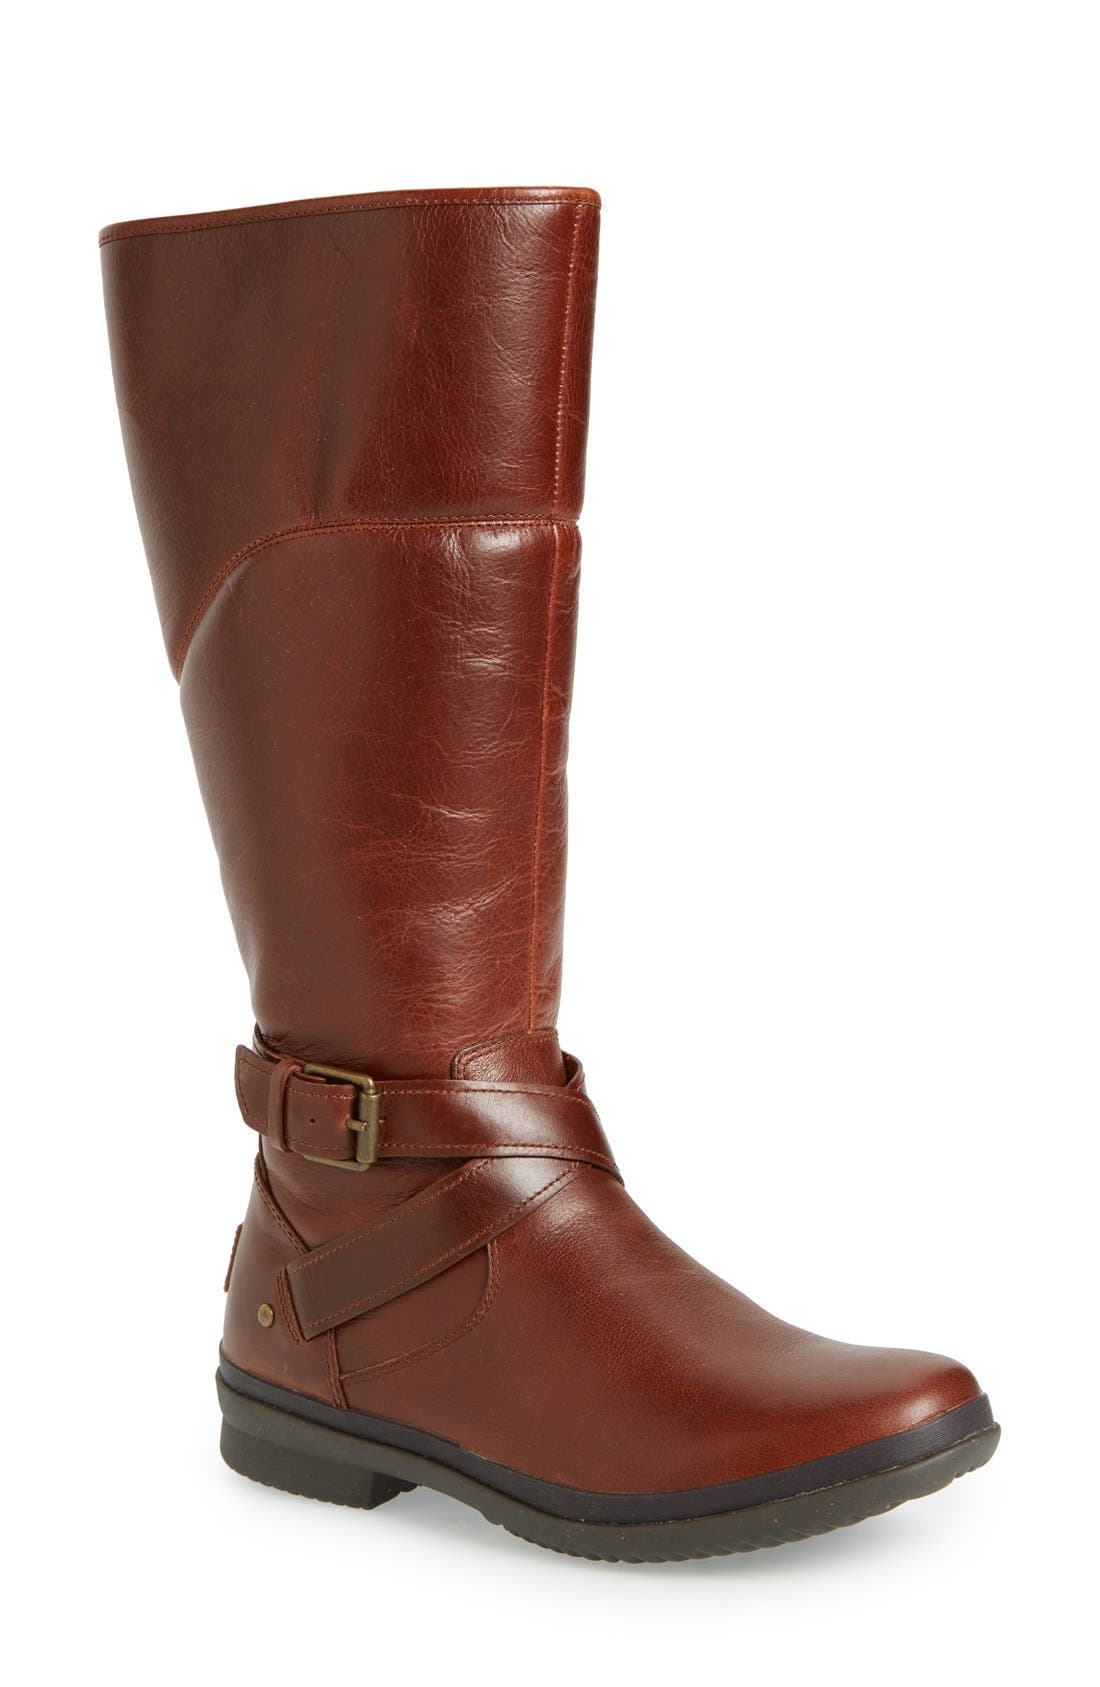 shearling lined riding boots